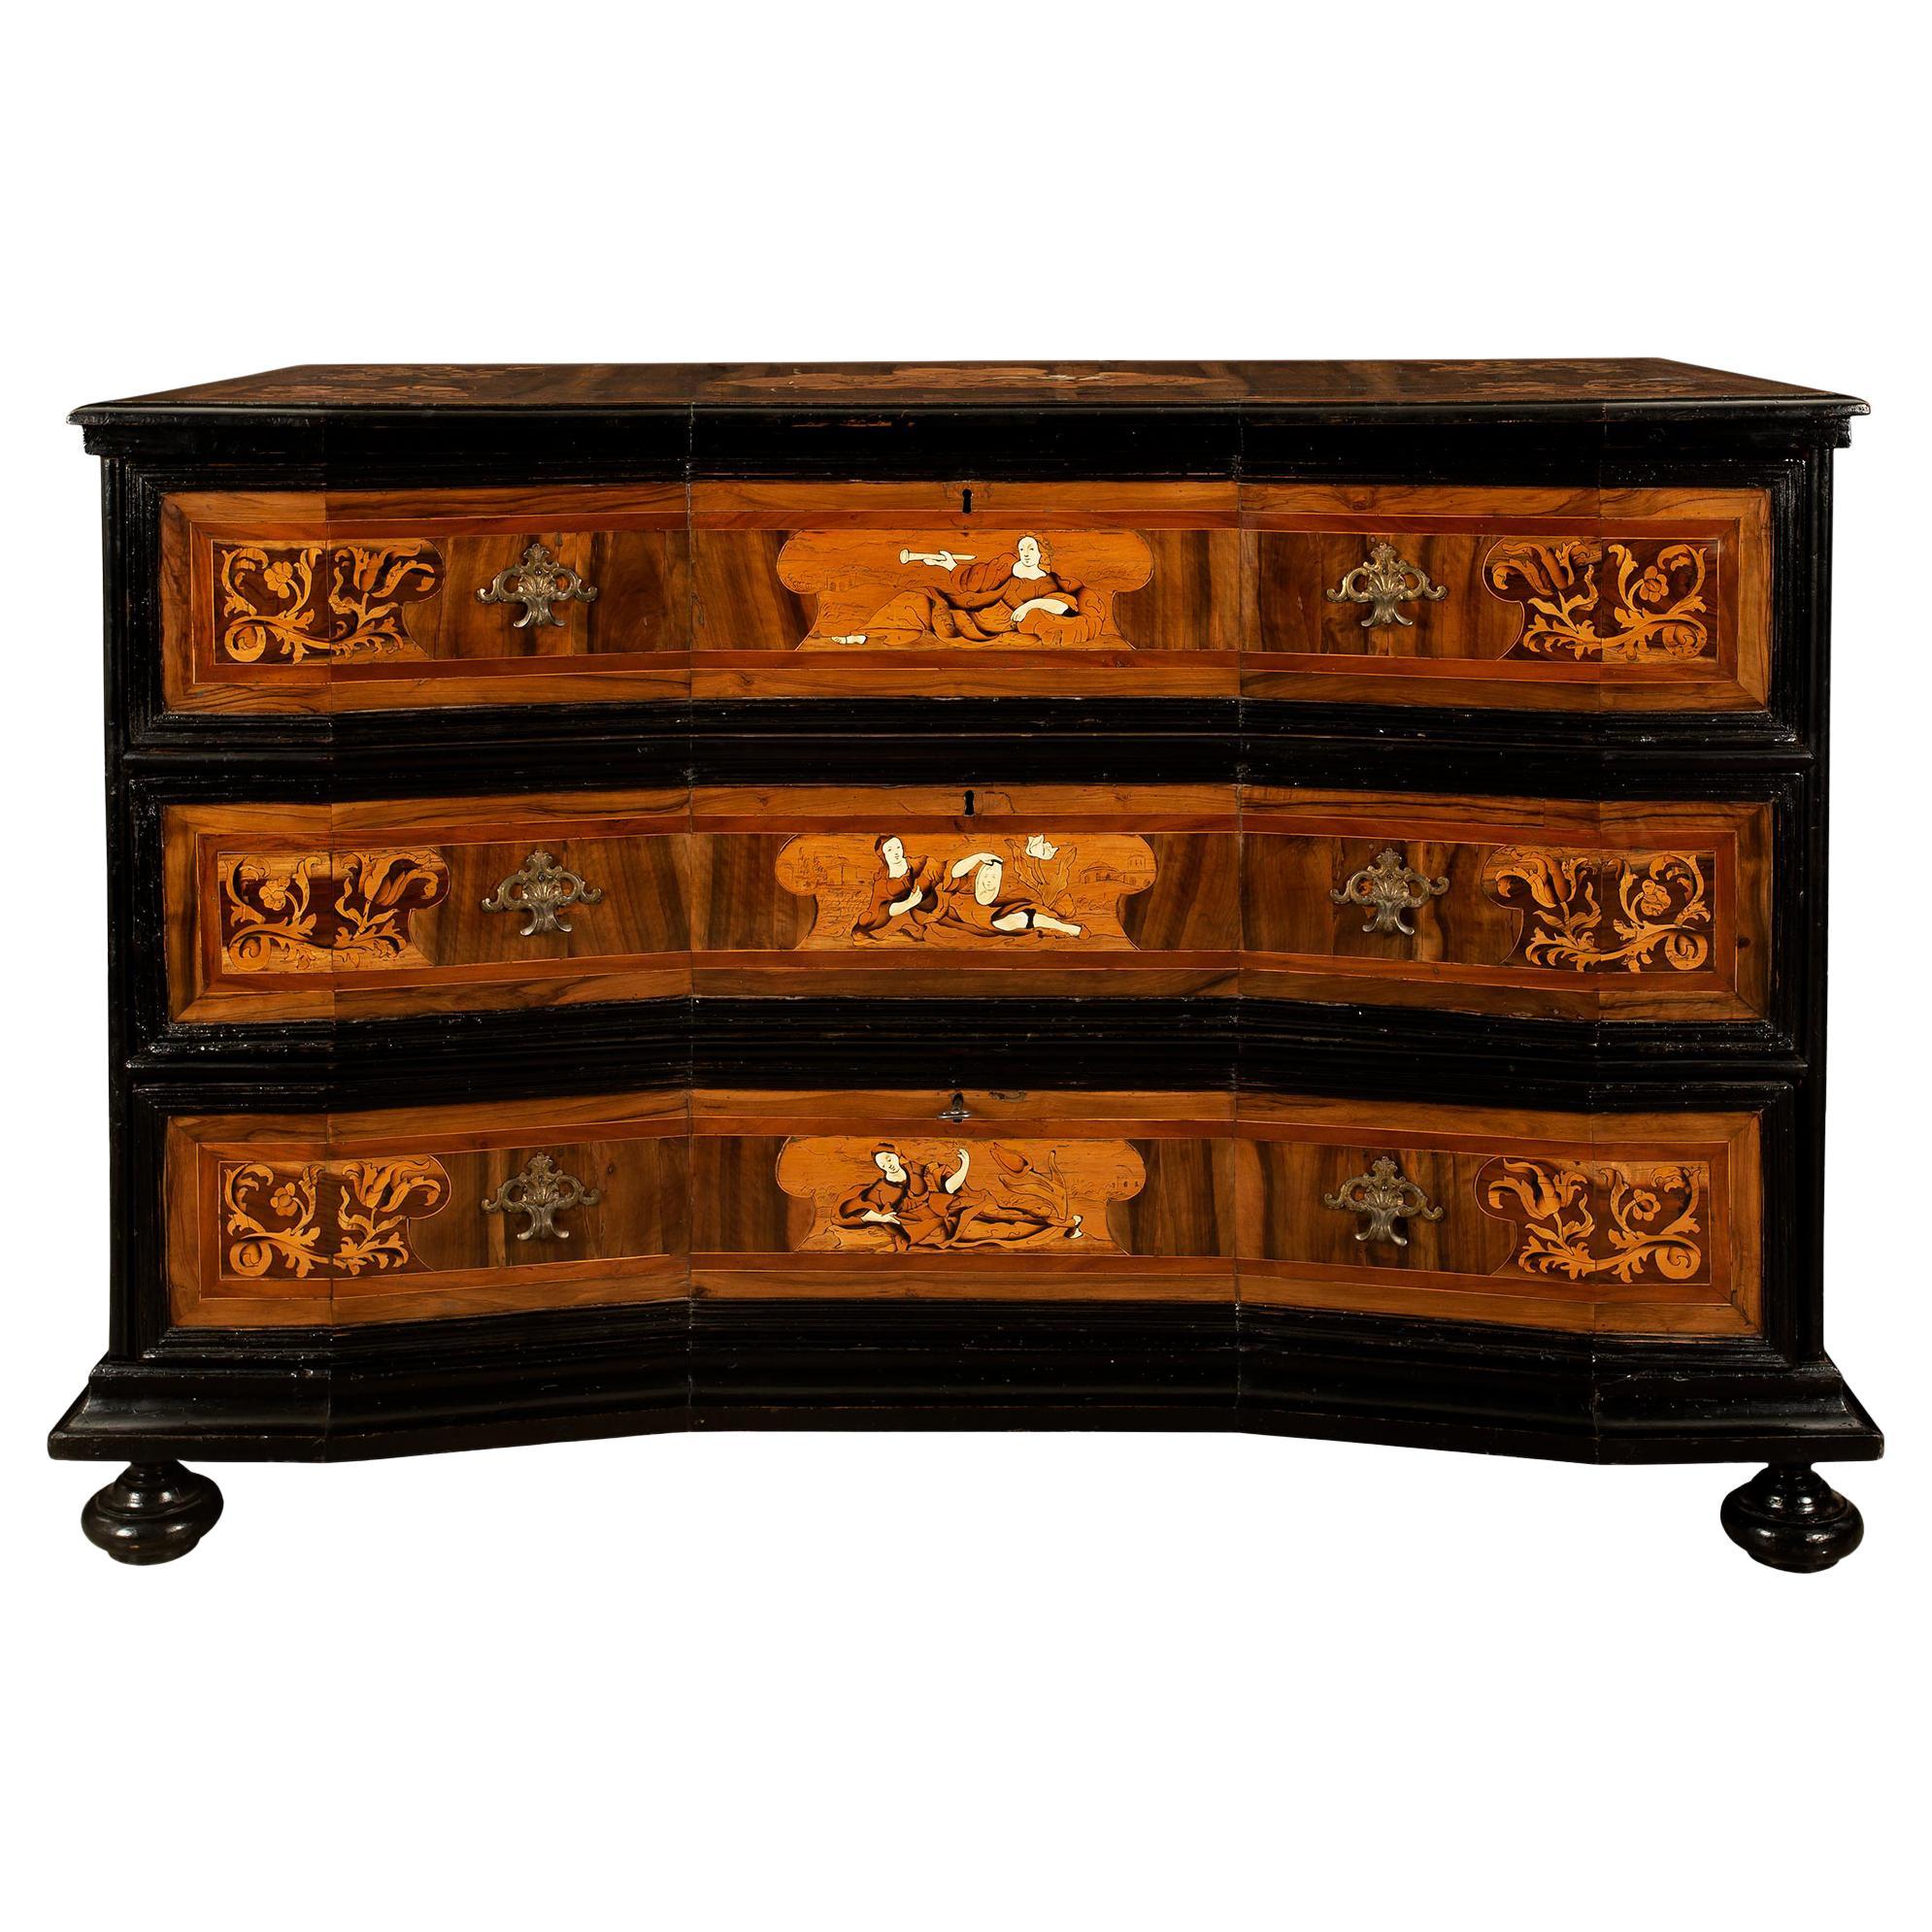 Italian Early 18th Century Inlaid Commode from the Lombardi Region For Sale